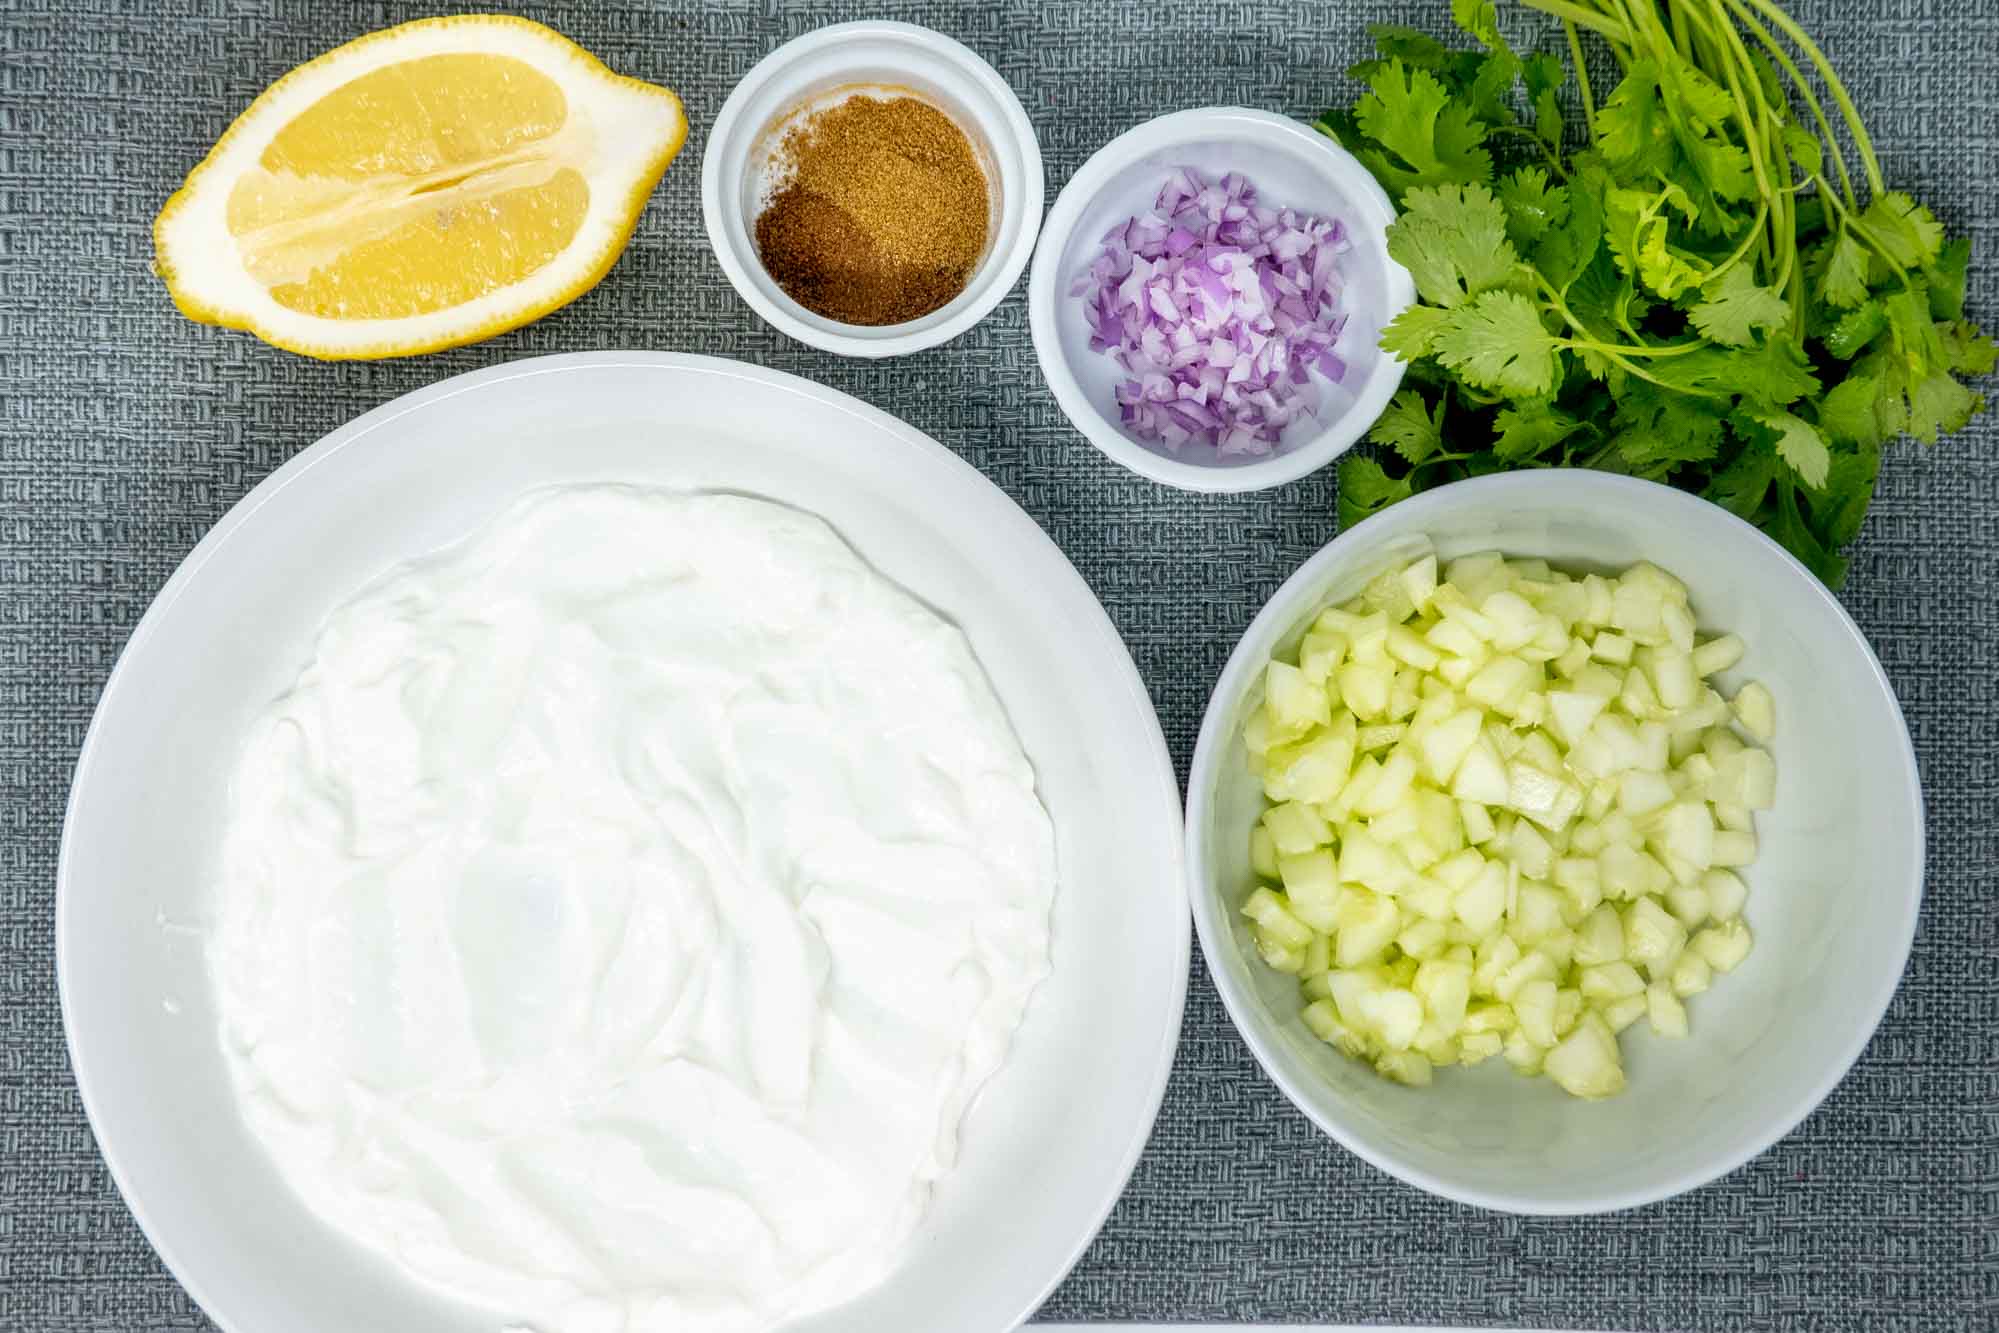 Bowls of Greek yogurt and chopped cucumber on a table next to half a lemon, spices, minced onion, and cilantro